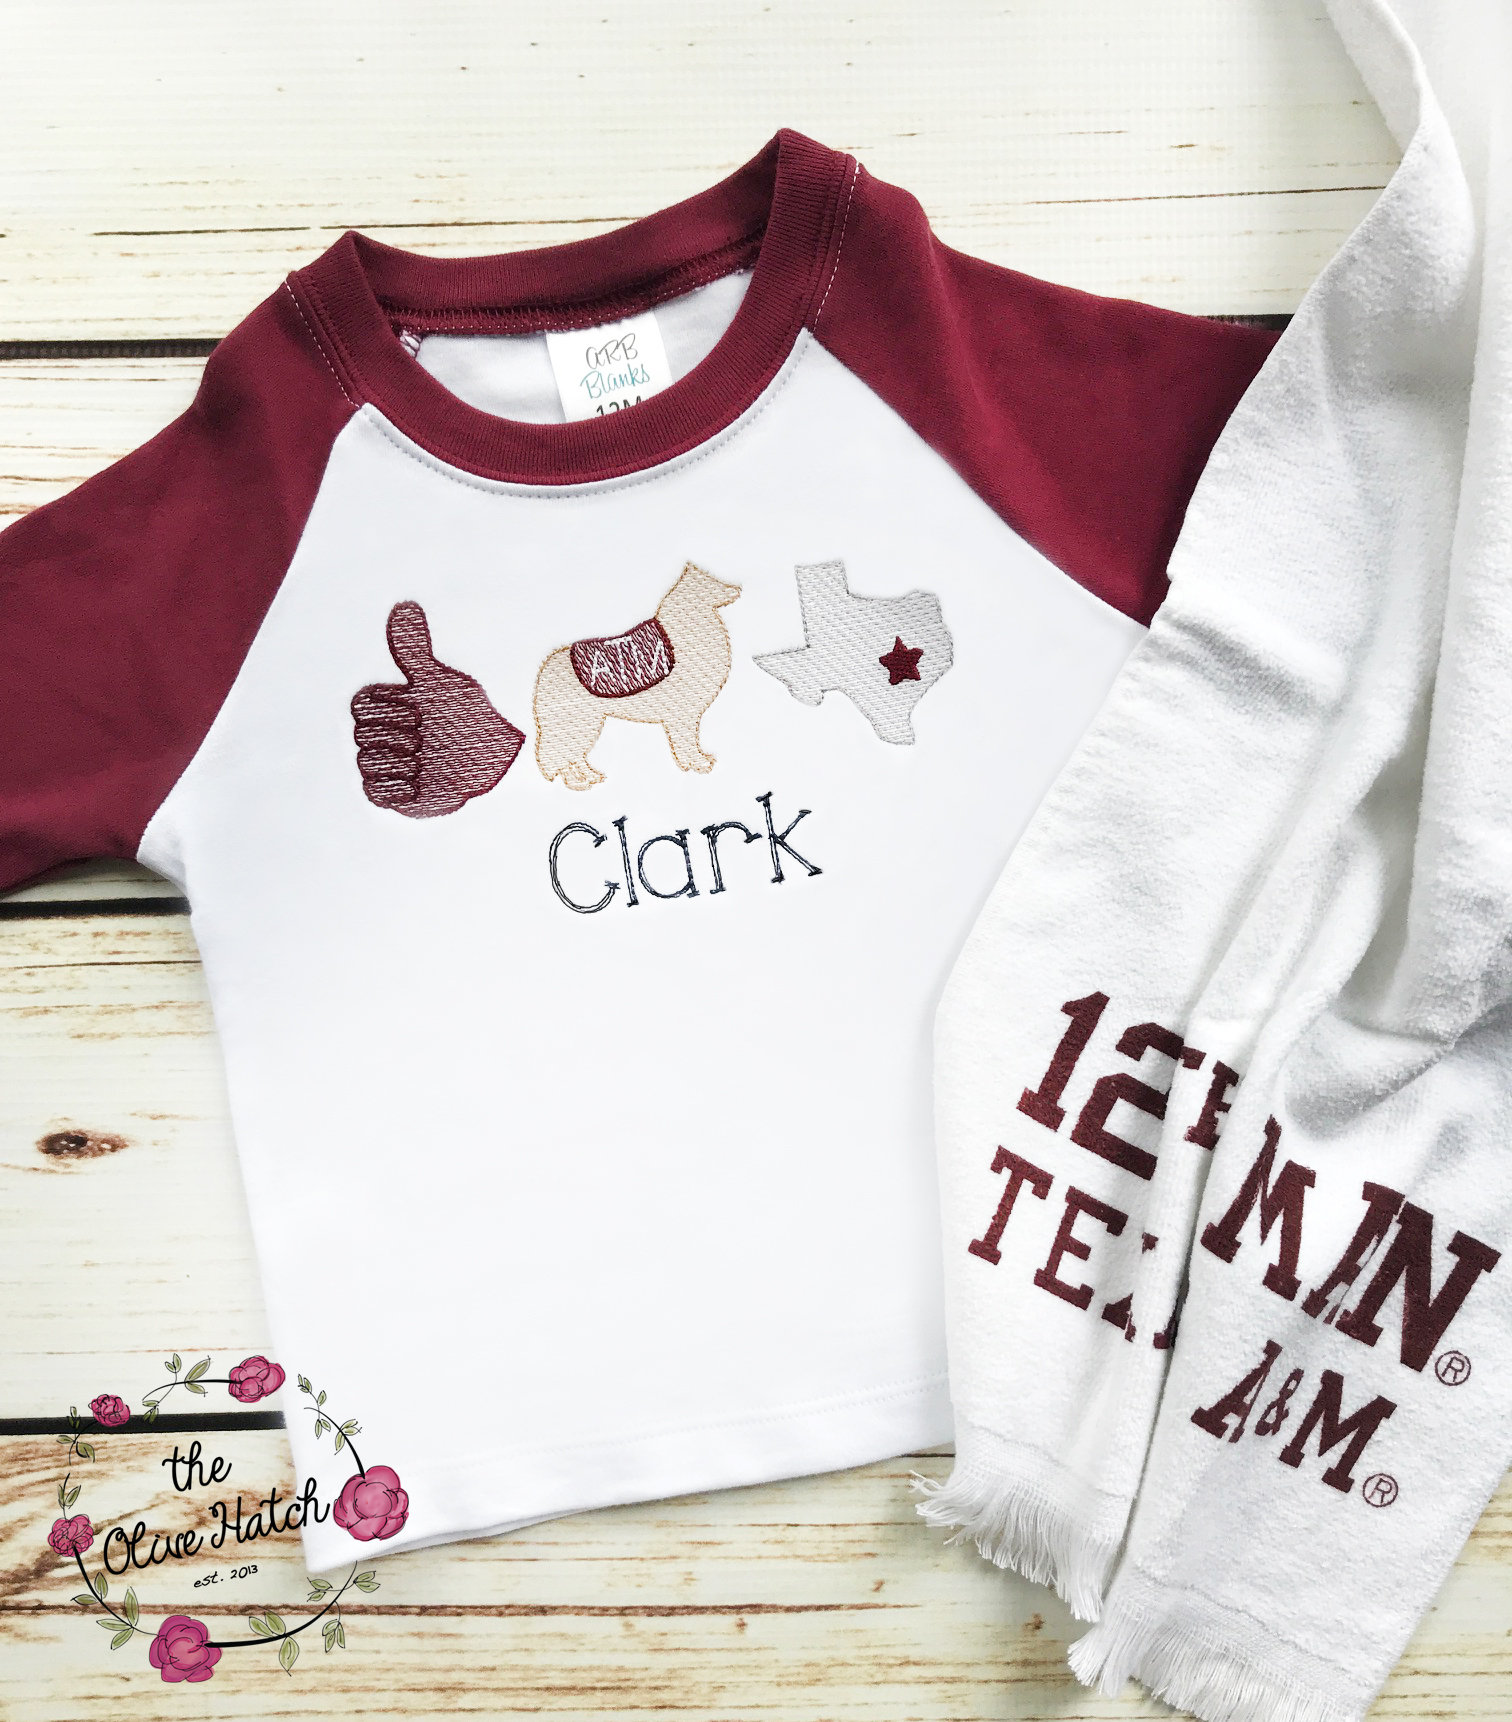 Applique Embroidery Team Spirit Maroon and White Football Trio Sketch Shirt